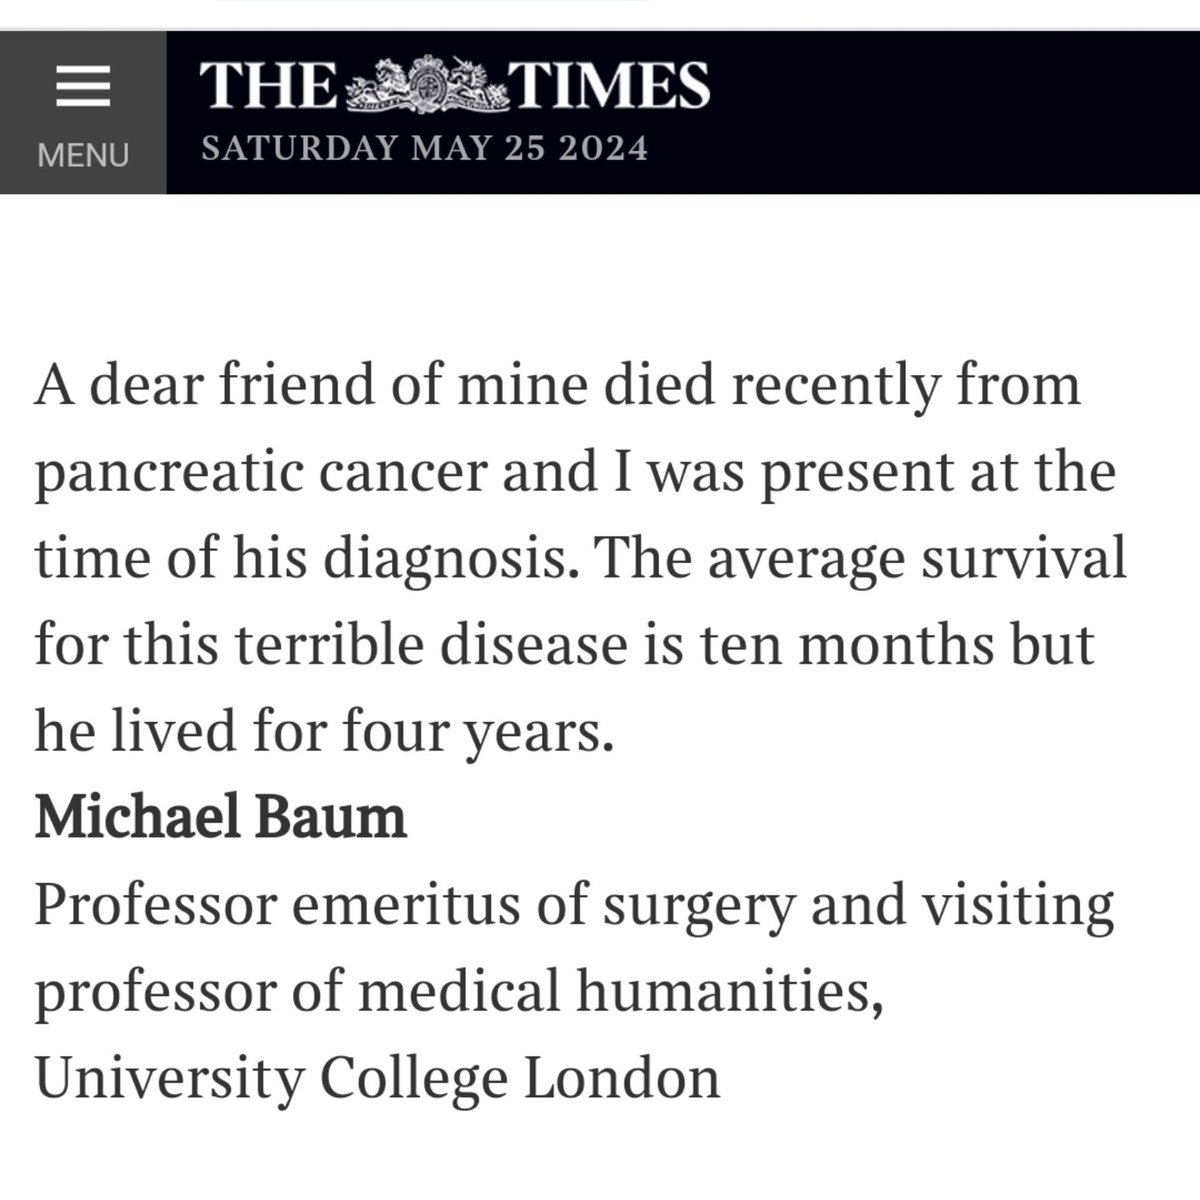 ✍🏻 #AssistedSuicide proposals rely on “the myth that [doctors including] oncologists can estimate with any precision that a patient has only six months to live… Half the patients may die within six months, but the other half may live much longer.” thetimes.co.uk/article/times-…